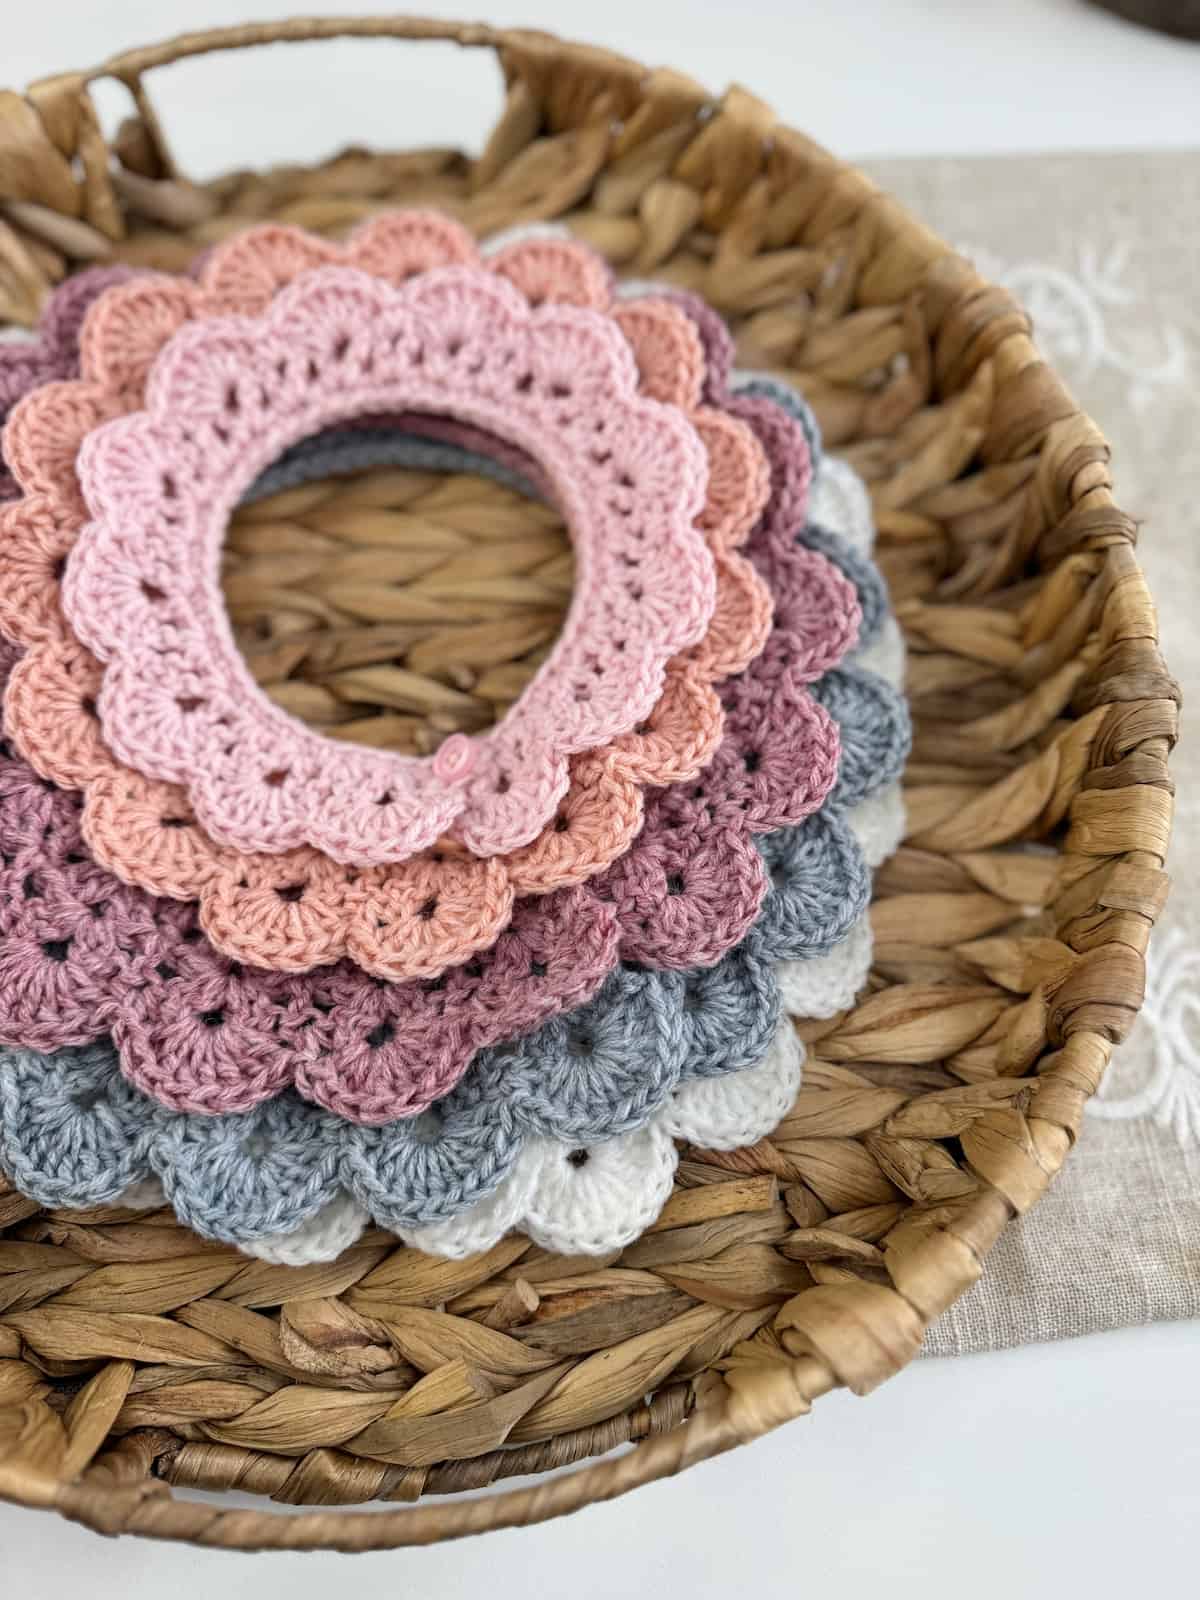 Crocheted collars in a basket on a table sizes baby to adult.